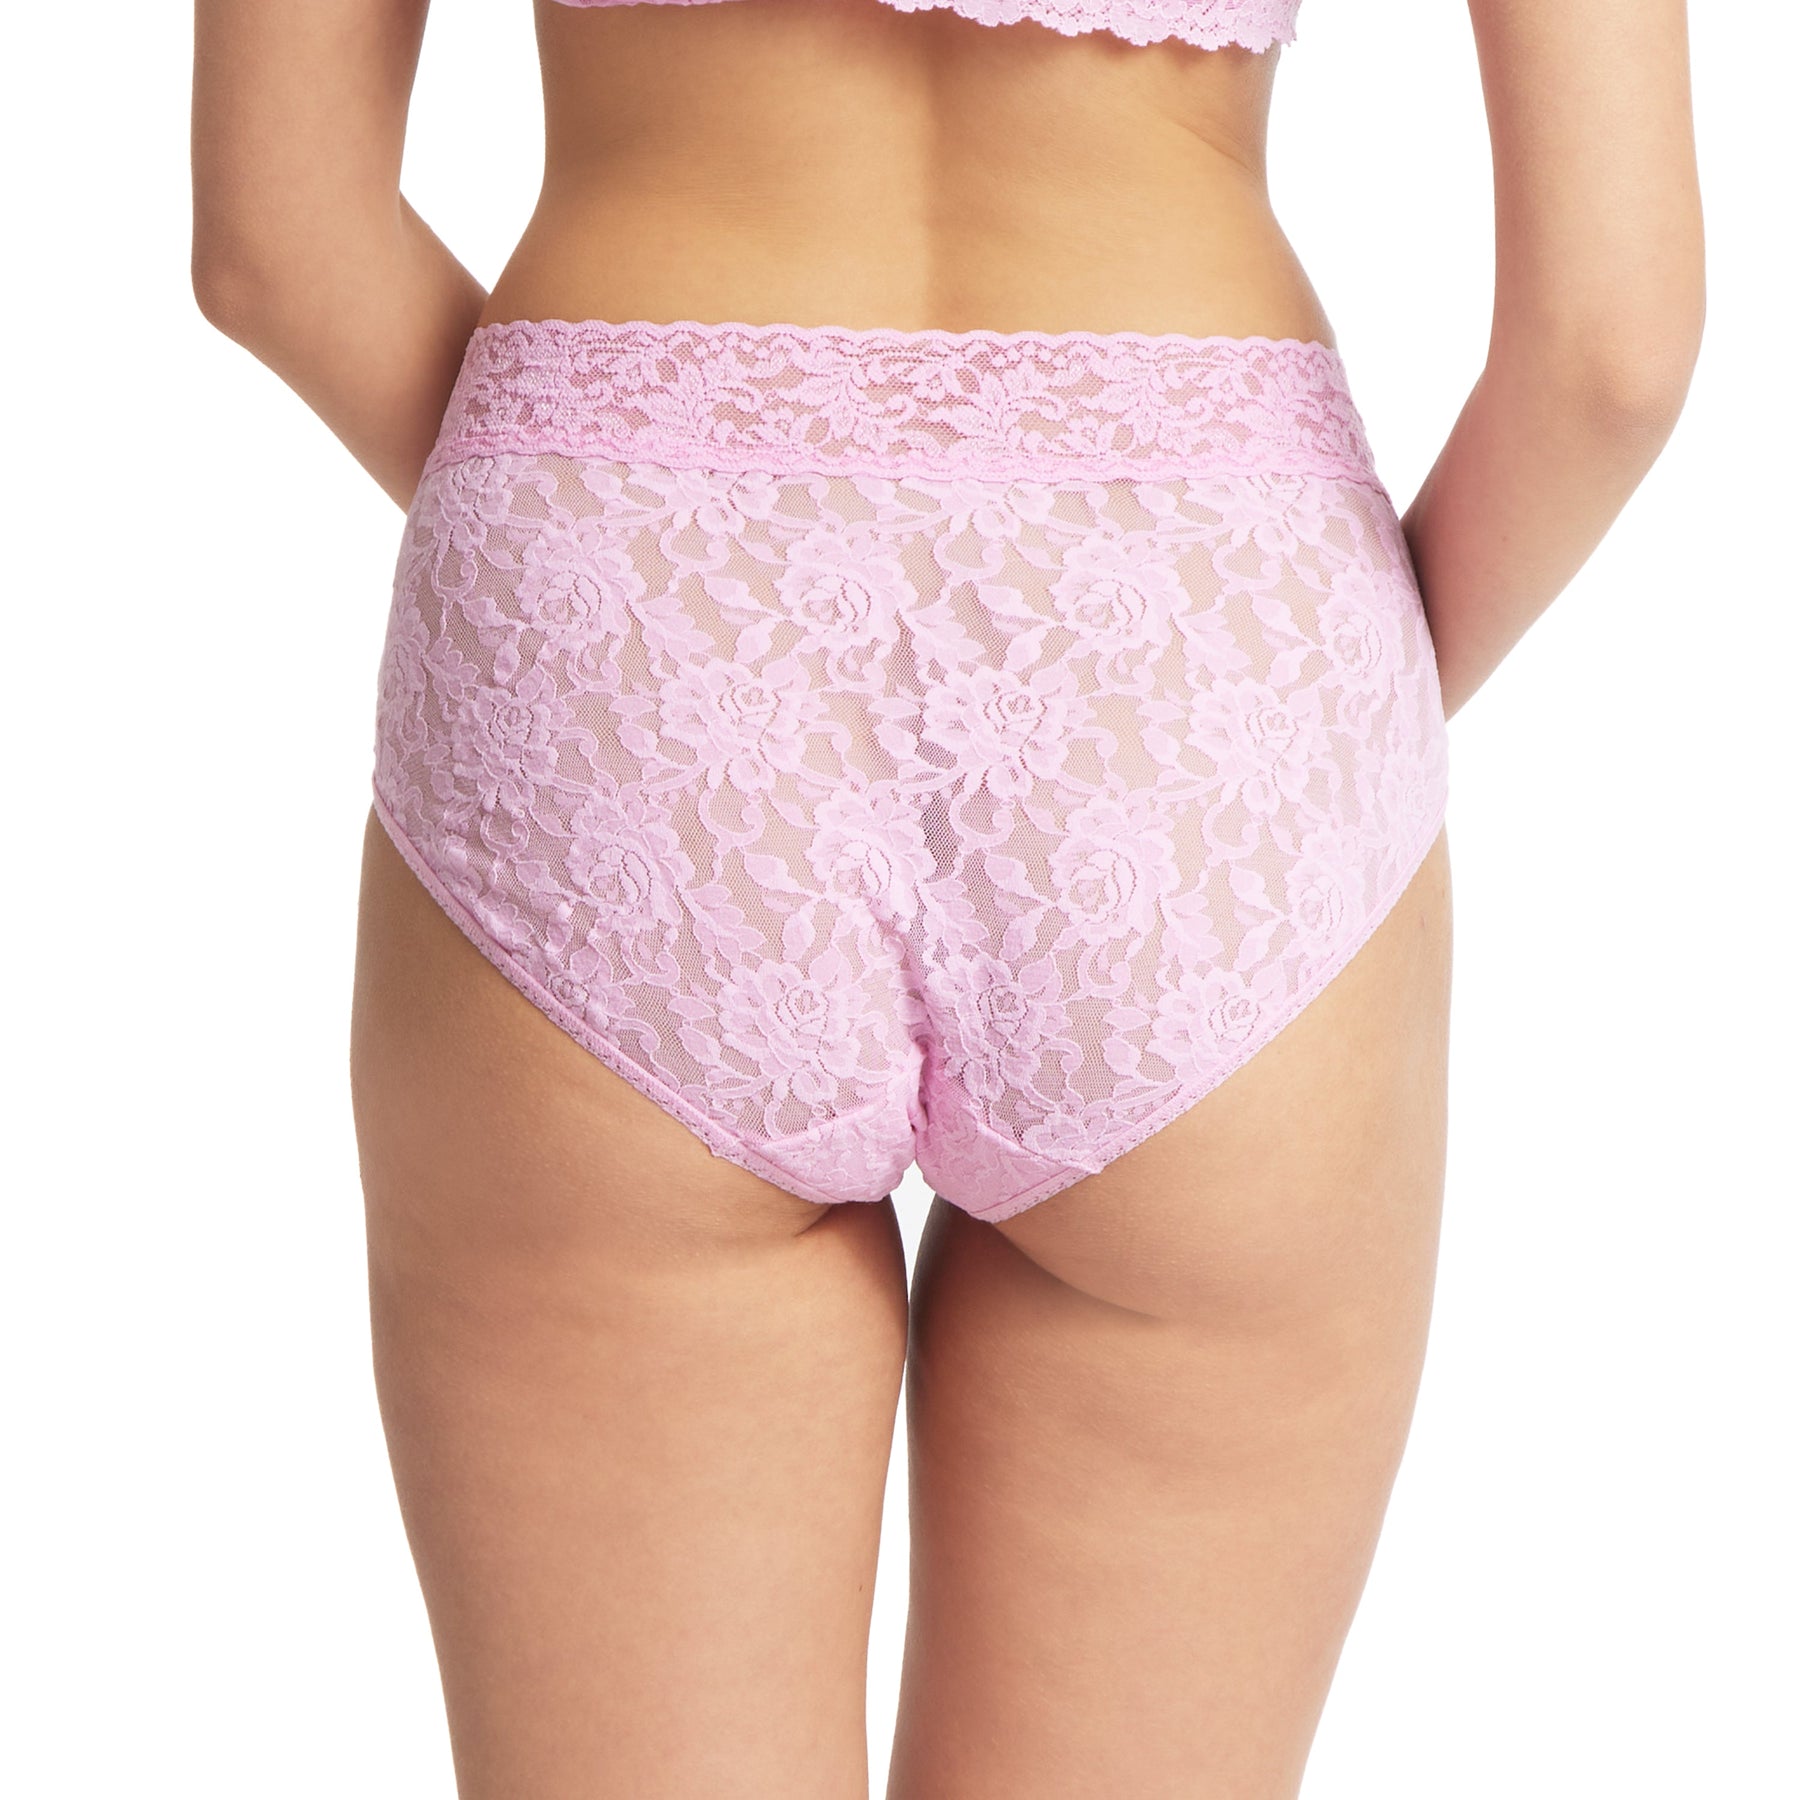 French Style Lingerie: french bikini, lace knickers